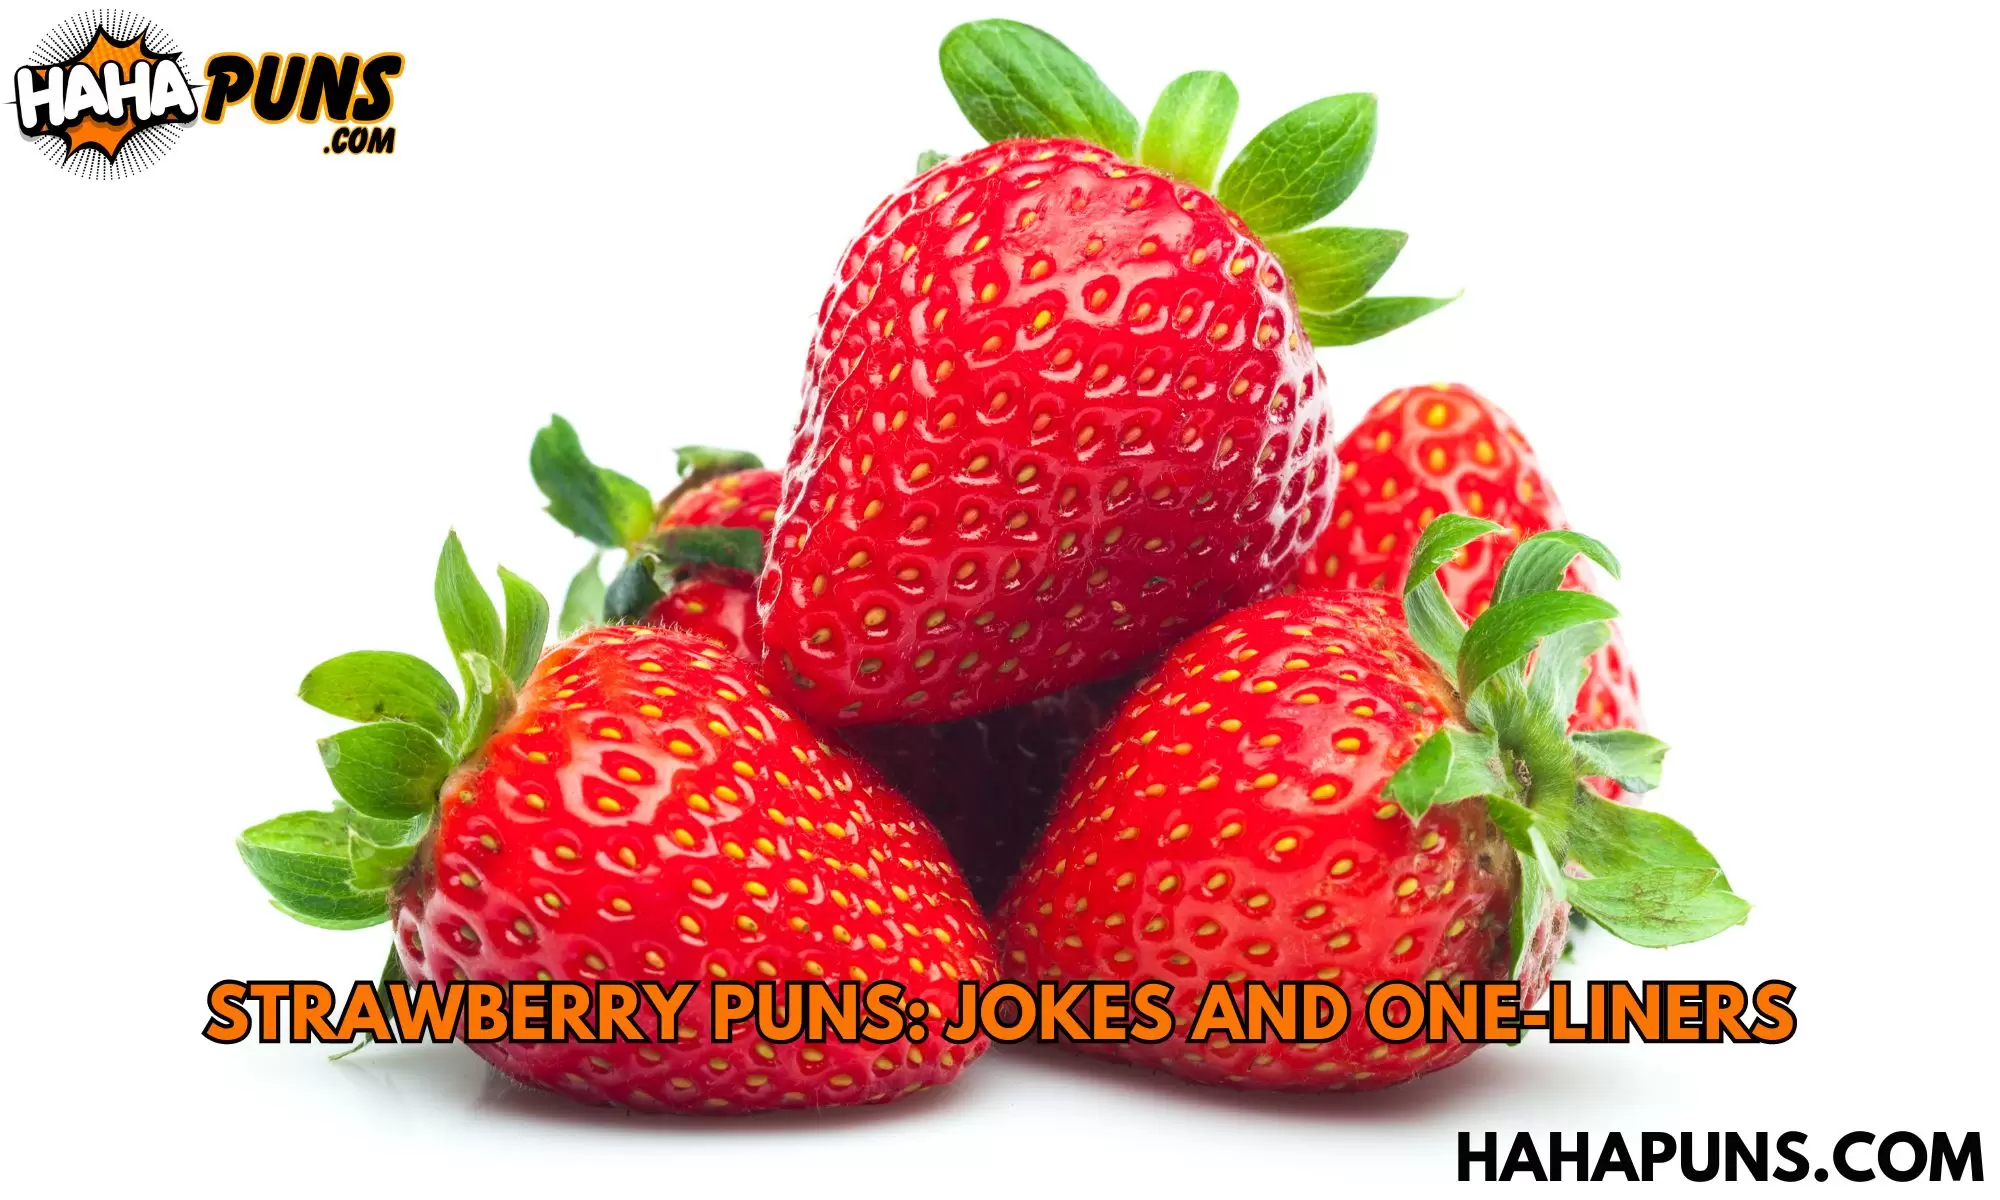 Strawberry Puns: Jokes And One-Liners